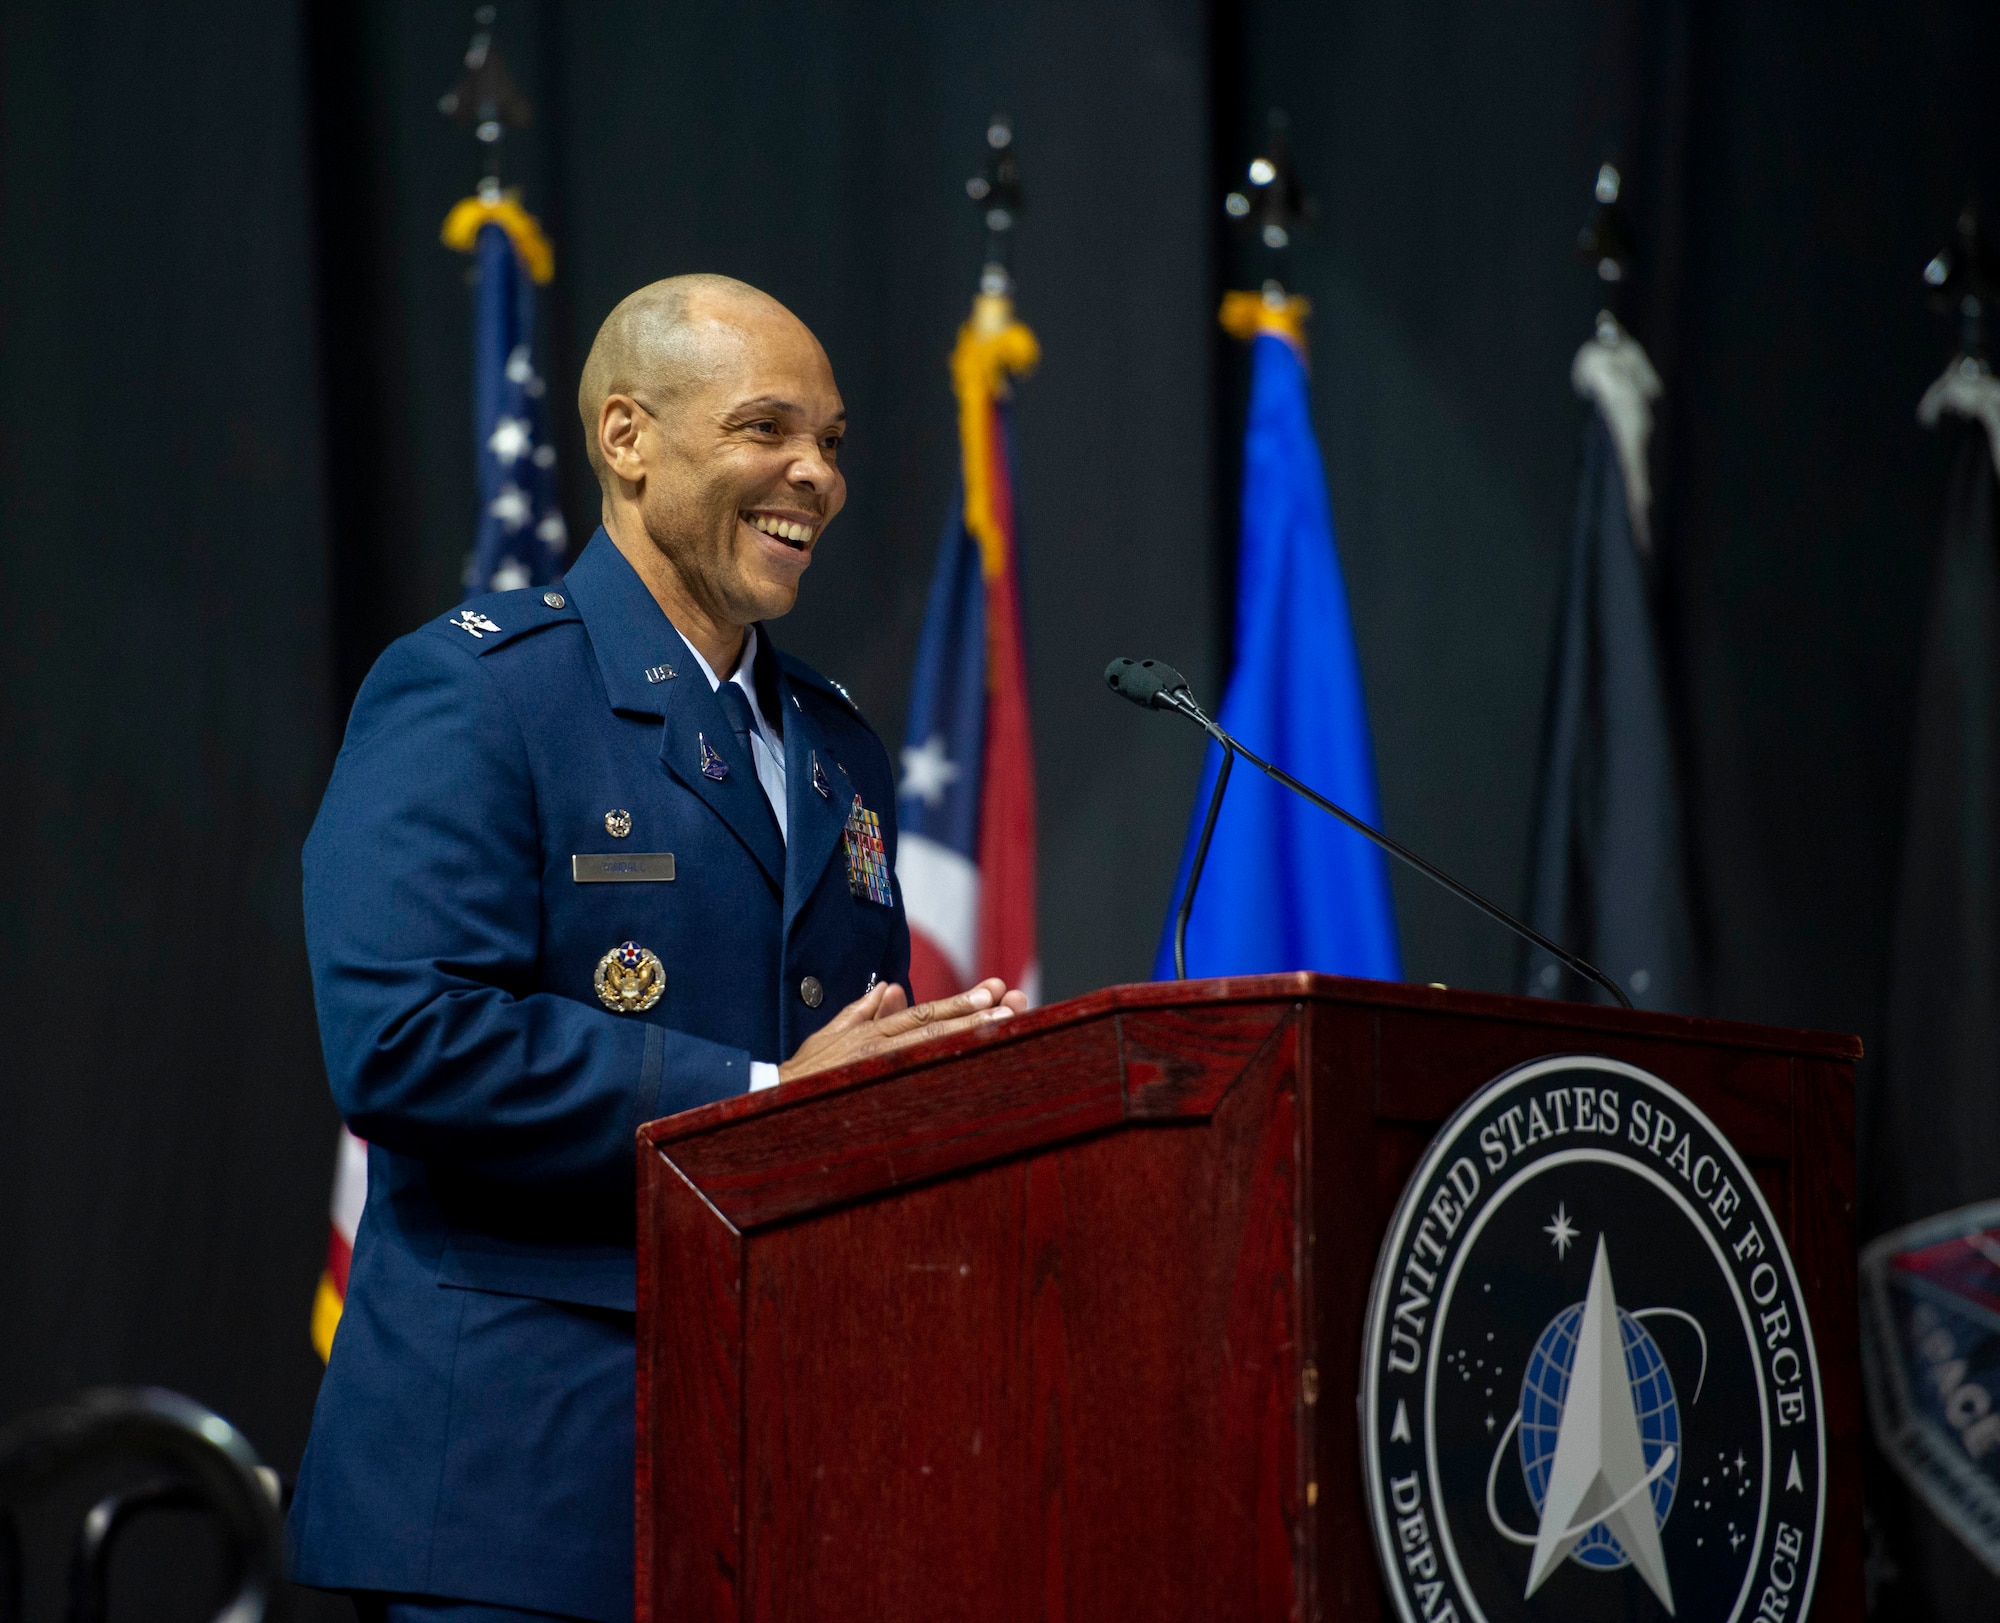 U.S. Space Force Colonel Marqus Randall, Space Delta 18 commander, share remarks at the activation ceremony for Space Operations Command's newest Delta, Space Delta 18, and established the National Space Intelligence Center (NSIC) at the Nutter Center, Dayton, Ohio, June 24, 2022. Space Delta 18 is named in honor of the U.S. Space Force's role as the 18th member of the intelligence community. Delta 18 will deliver critical intelligence on threat systems, foreign intentions, and activities in the space domain to support national leaders, allies, partners and joint war fighters.( (U.S. Space Force photo by SrA Jack Gardner)